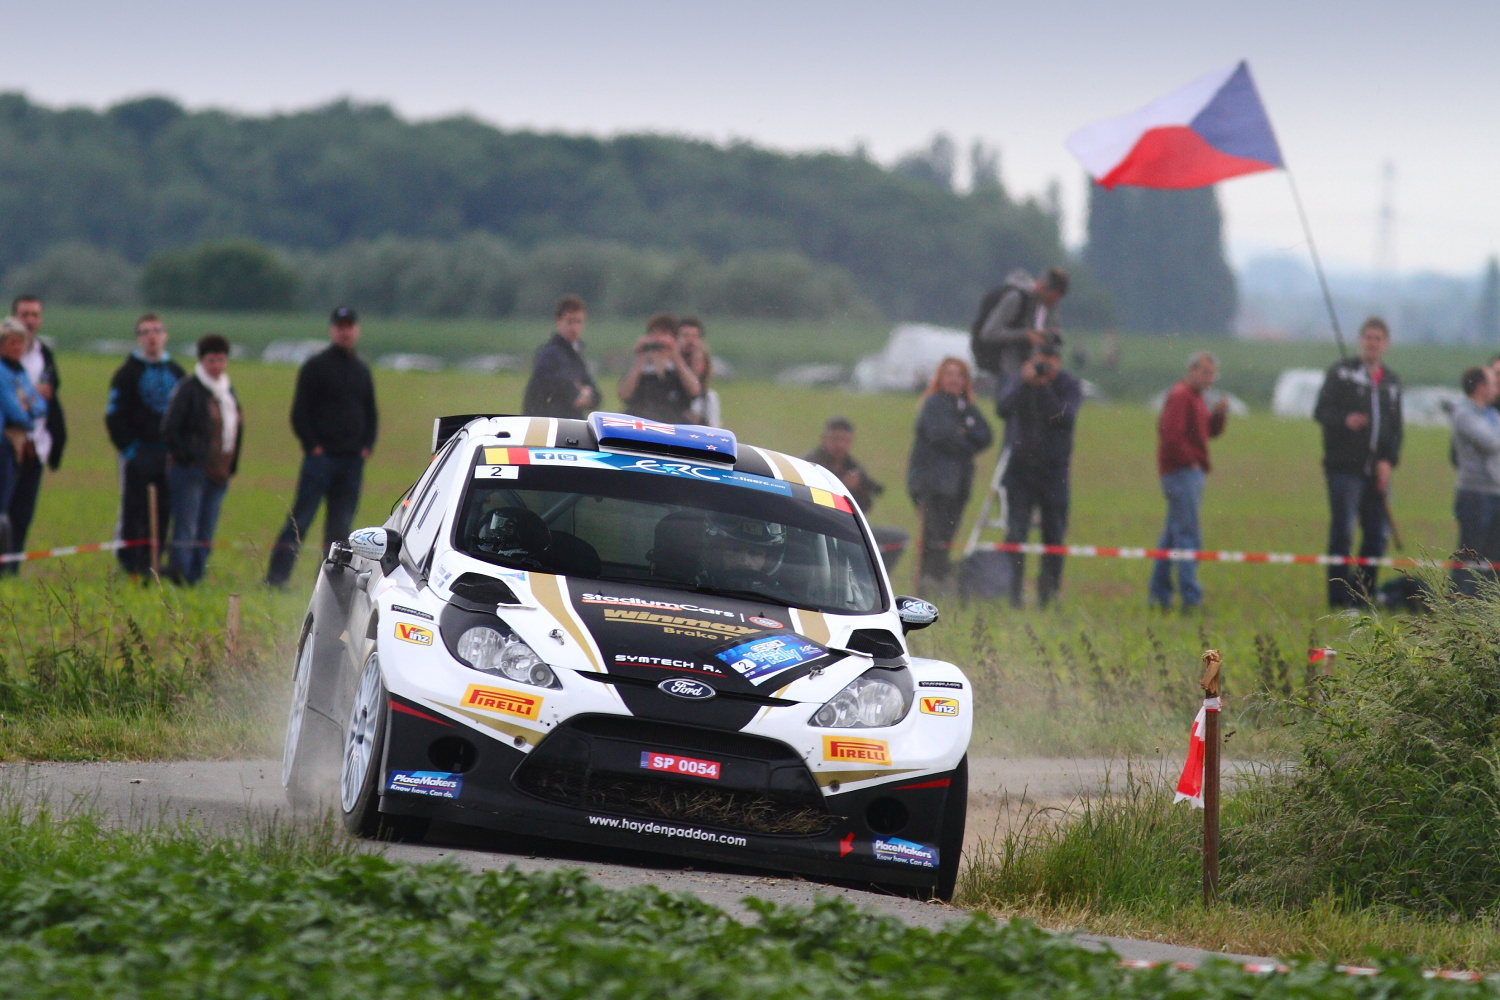 Paddon achieves stage win on opening day of Ypres Rally